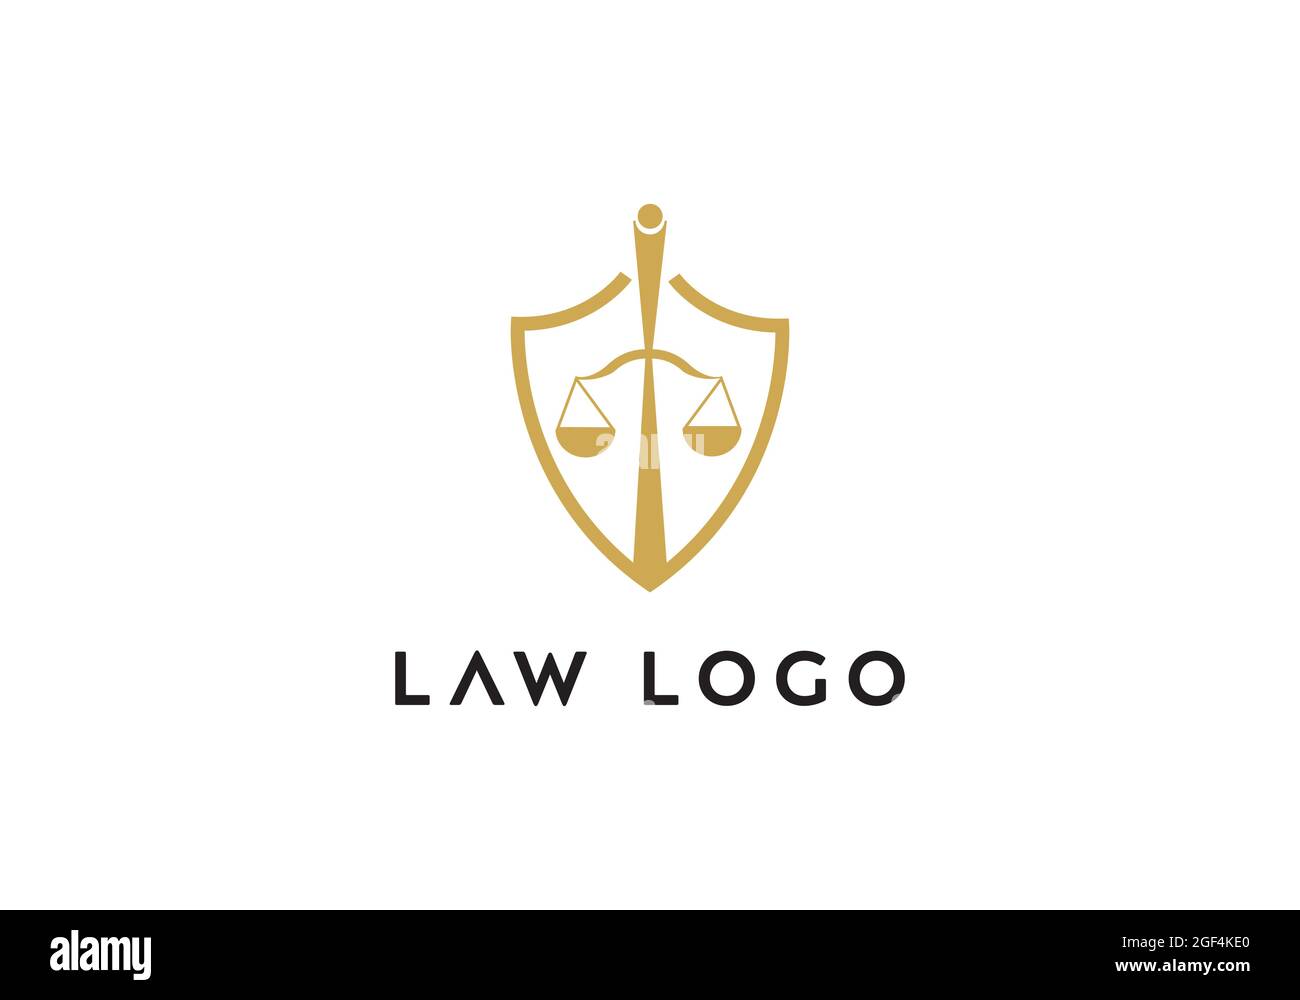 Law Firm Logo Design Template Stock Vector